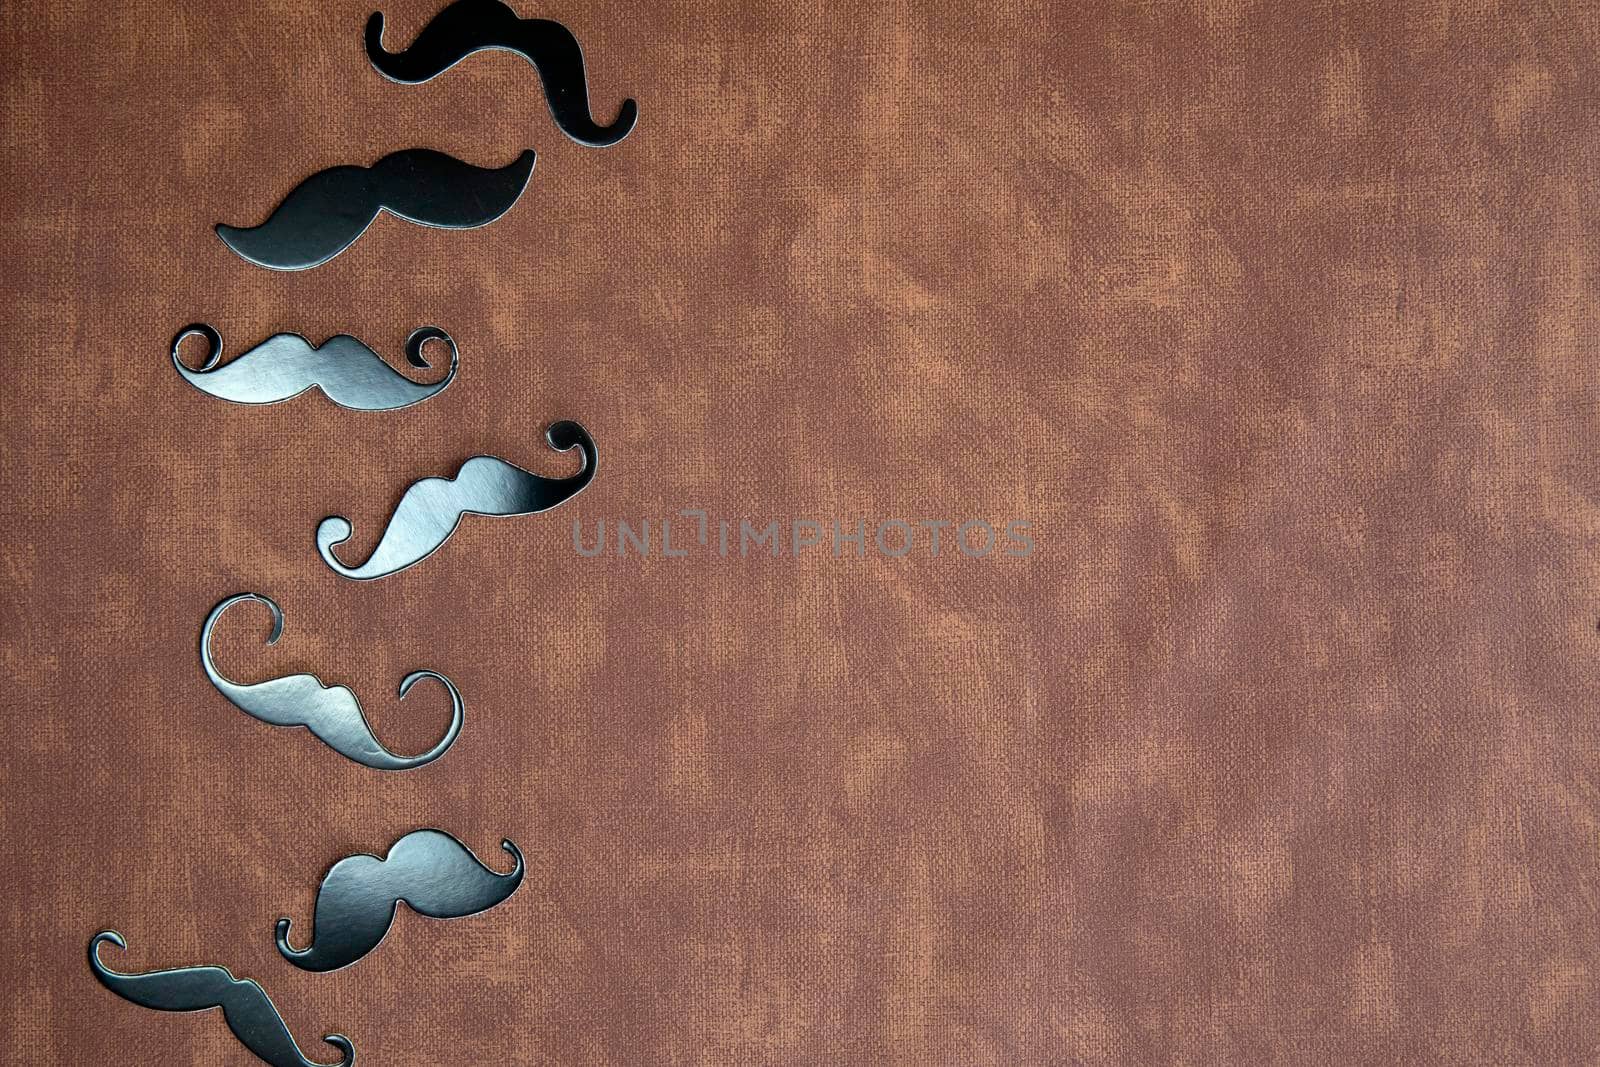 Black mustache and hat on brown leather background texture with copy space, International Men's day and Fathers Day concept by Annebel146